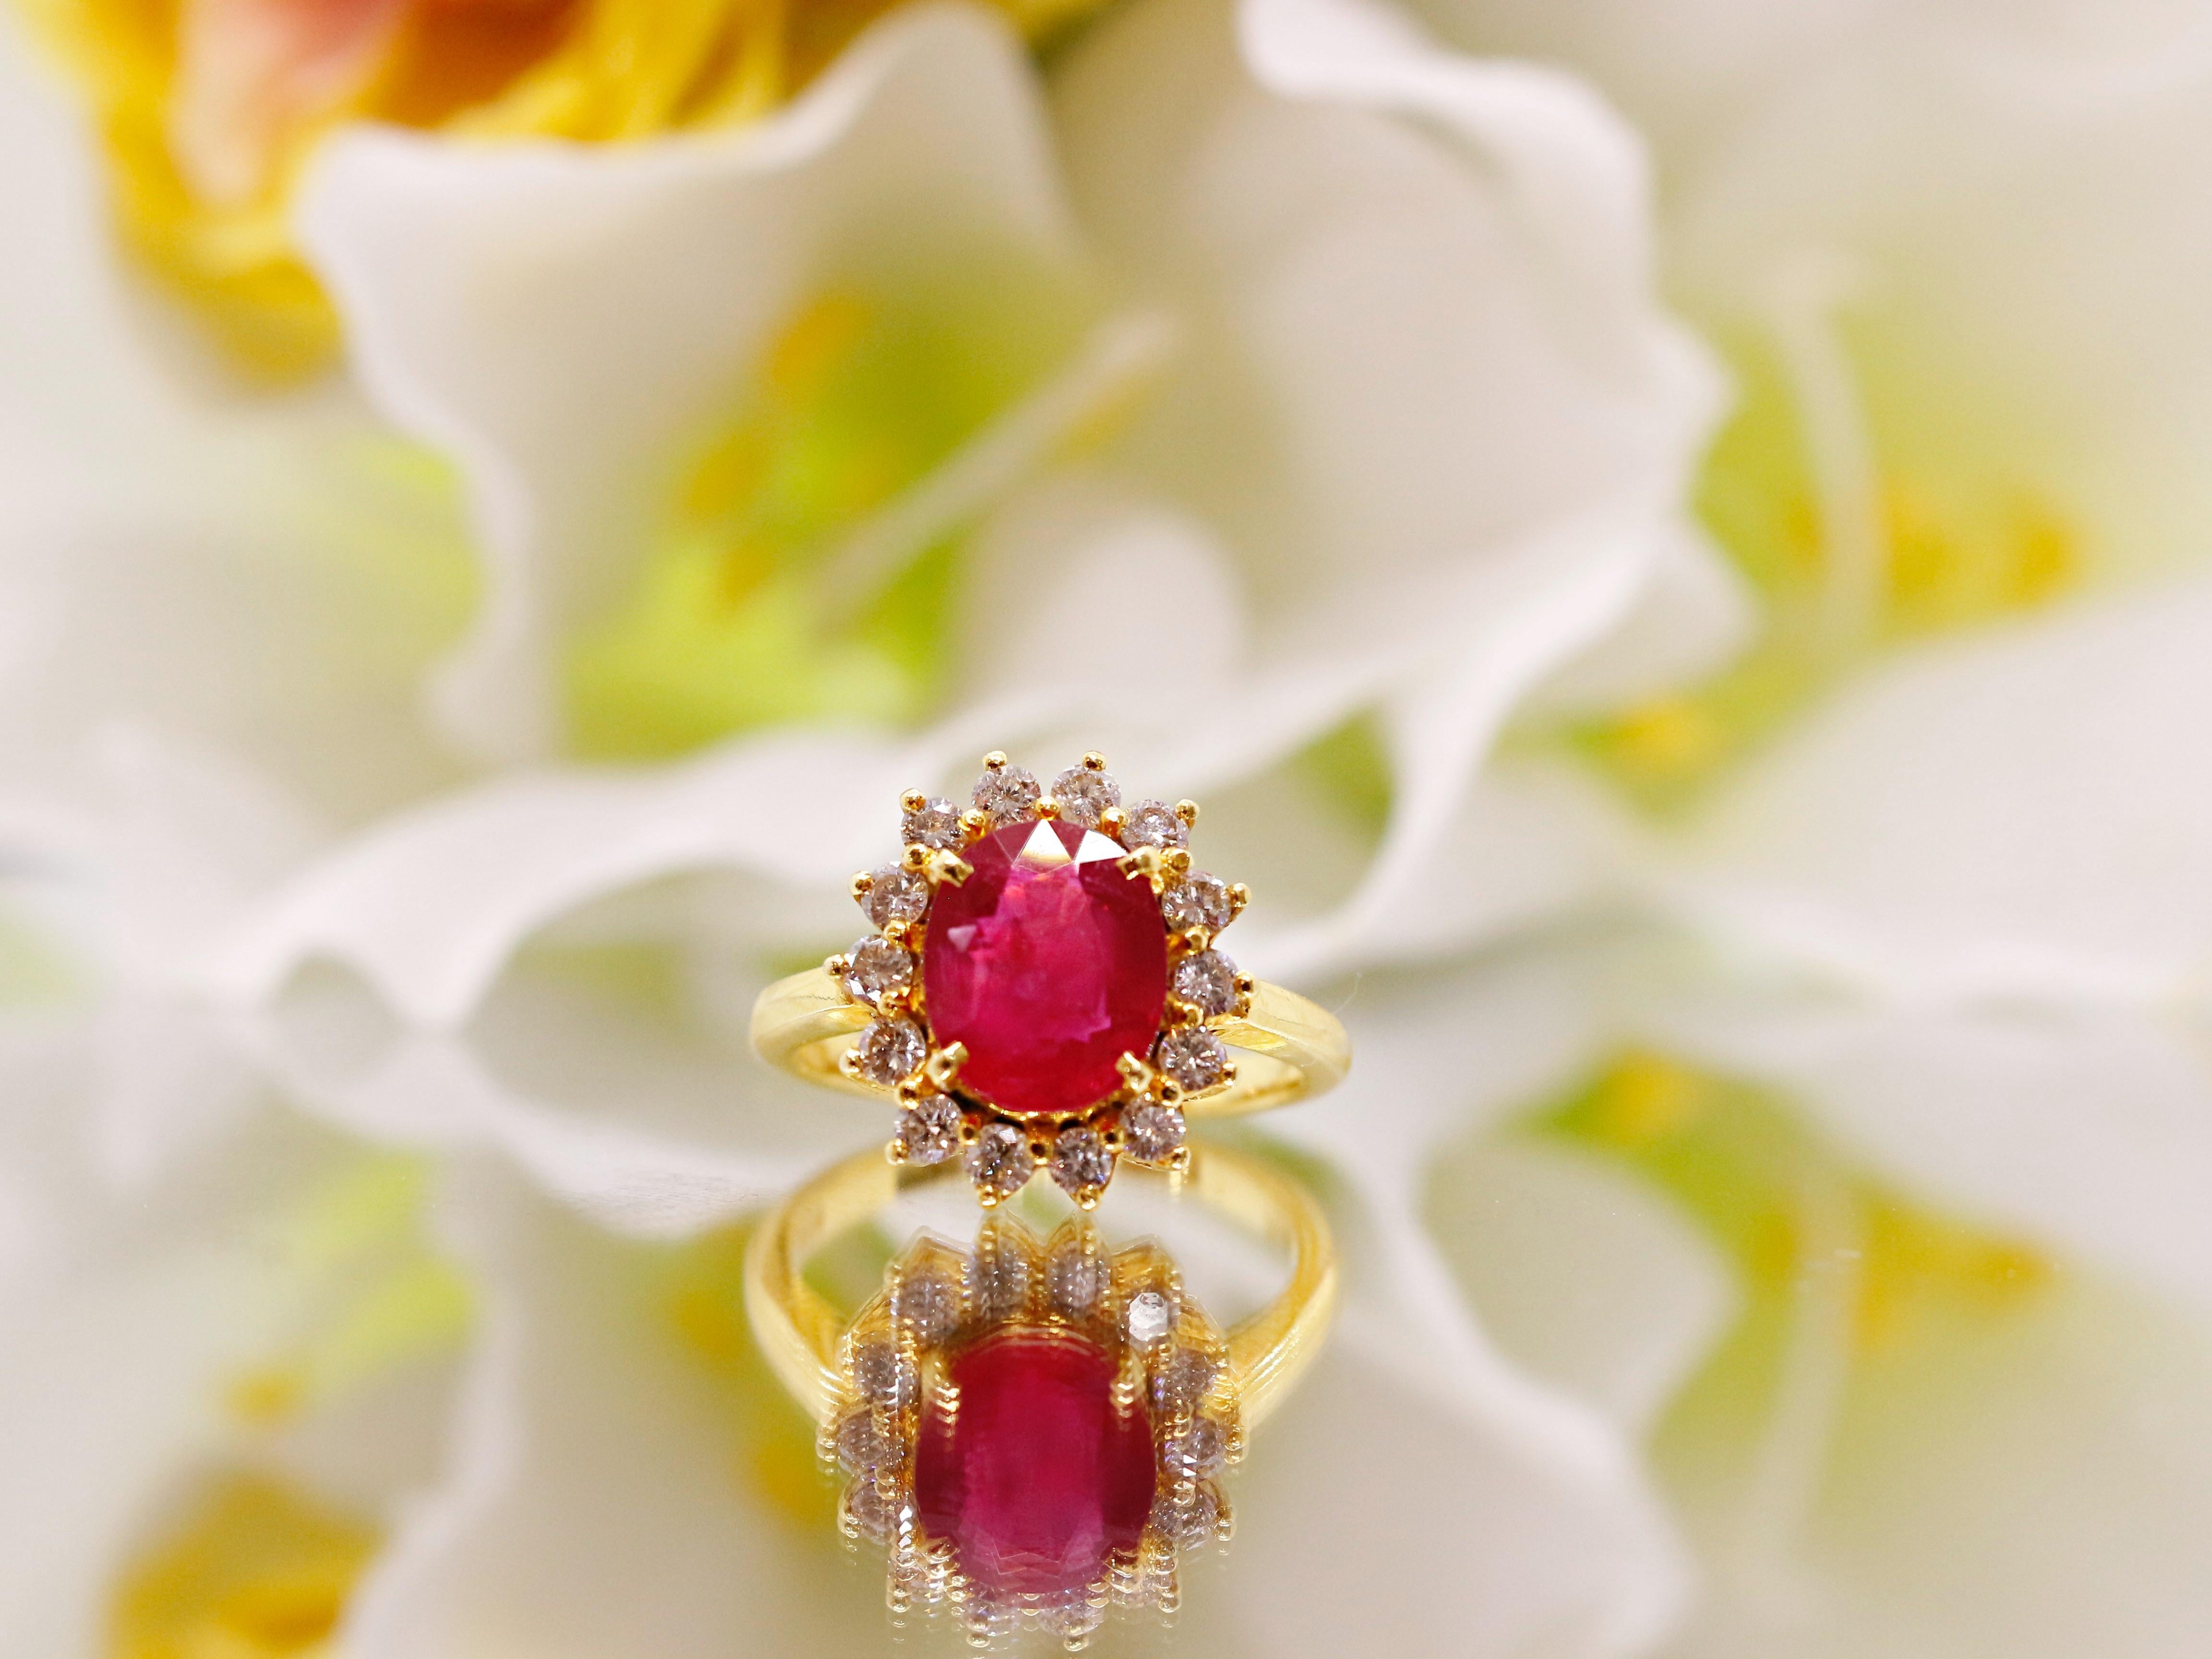 Exquisite 3.10ct Ruby & Diamond Halo Ring in 18K Gold  Perfect for Engagement, Promise, Anniversary - July Birthstone